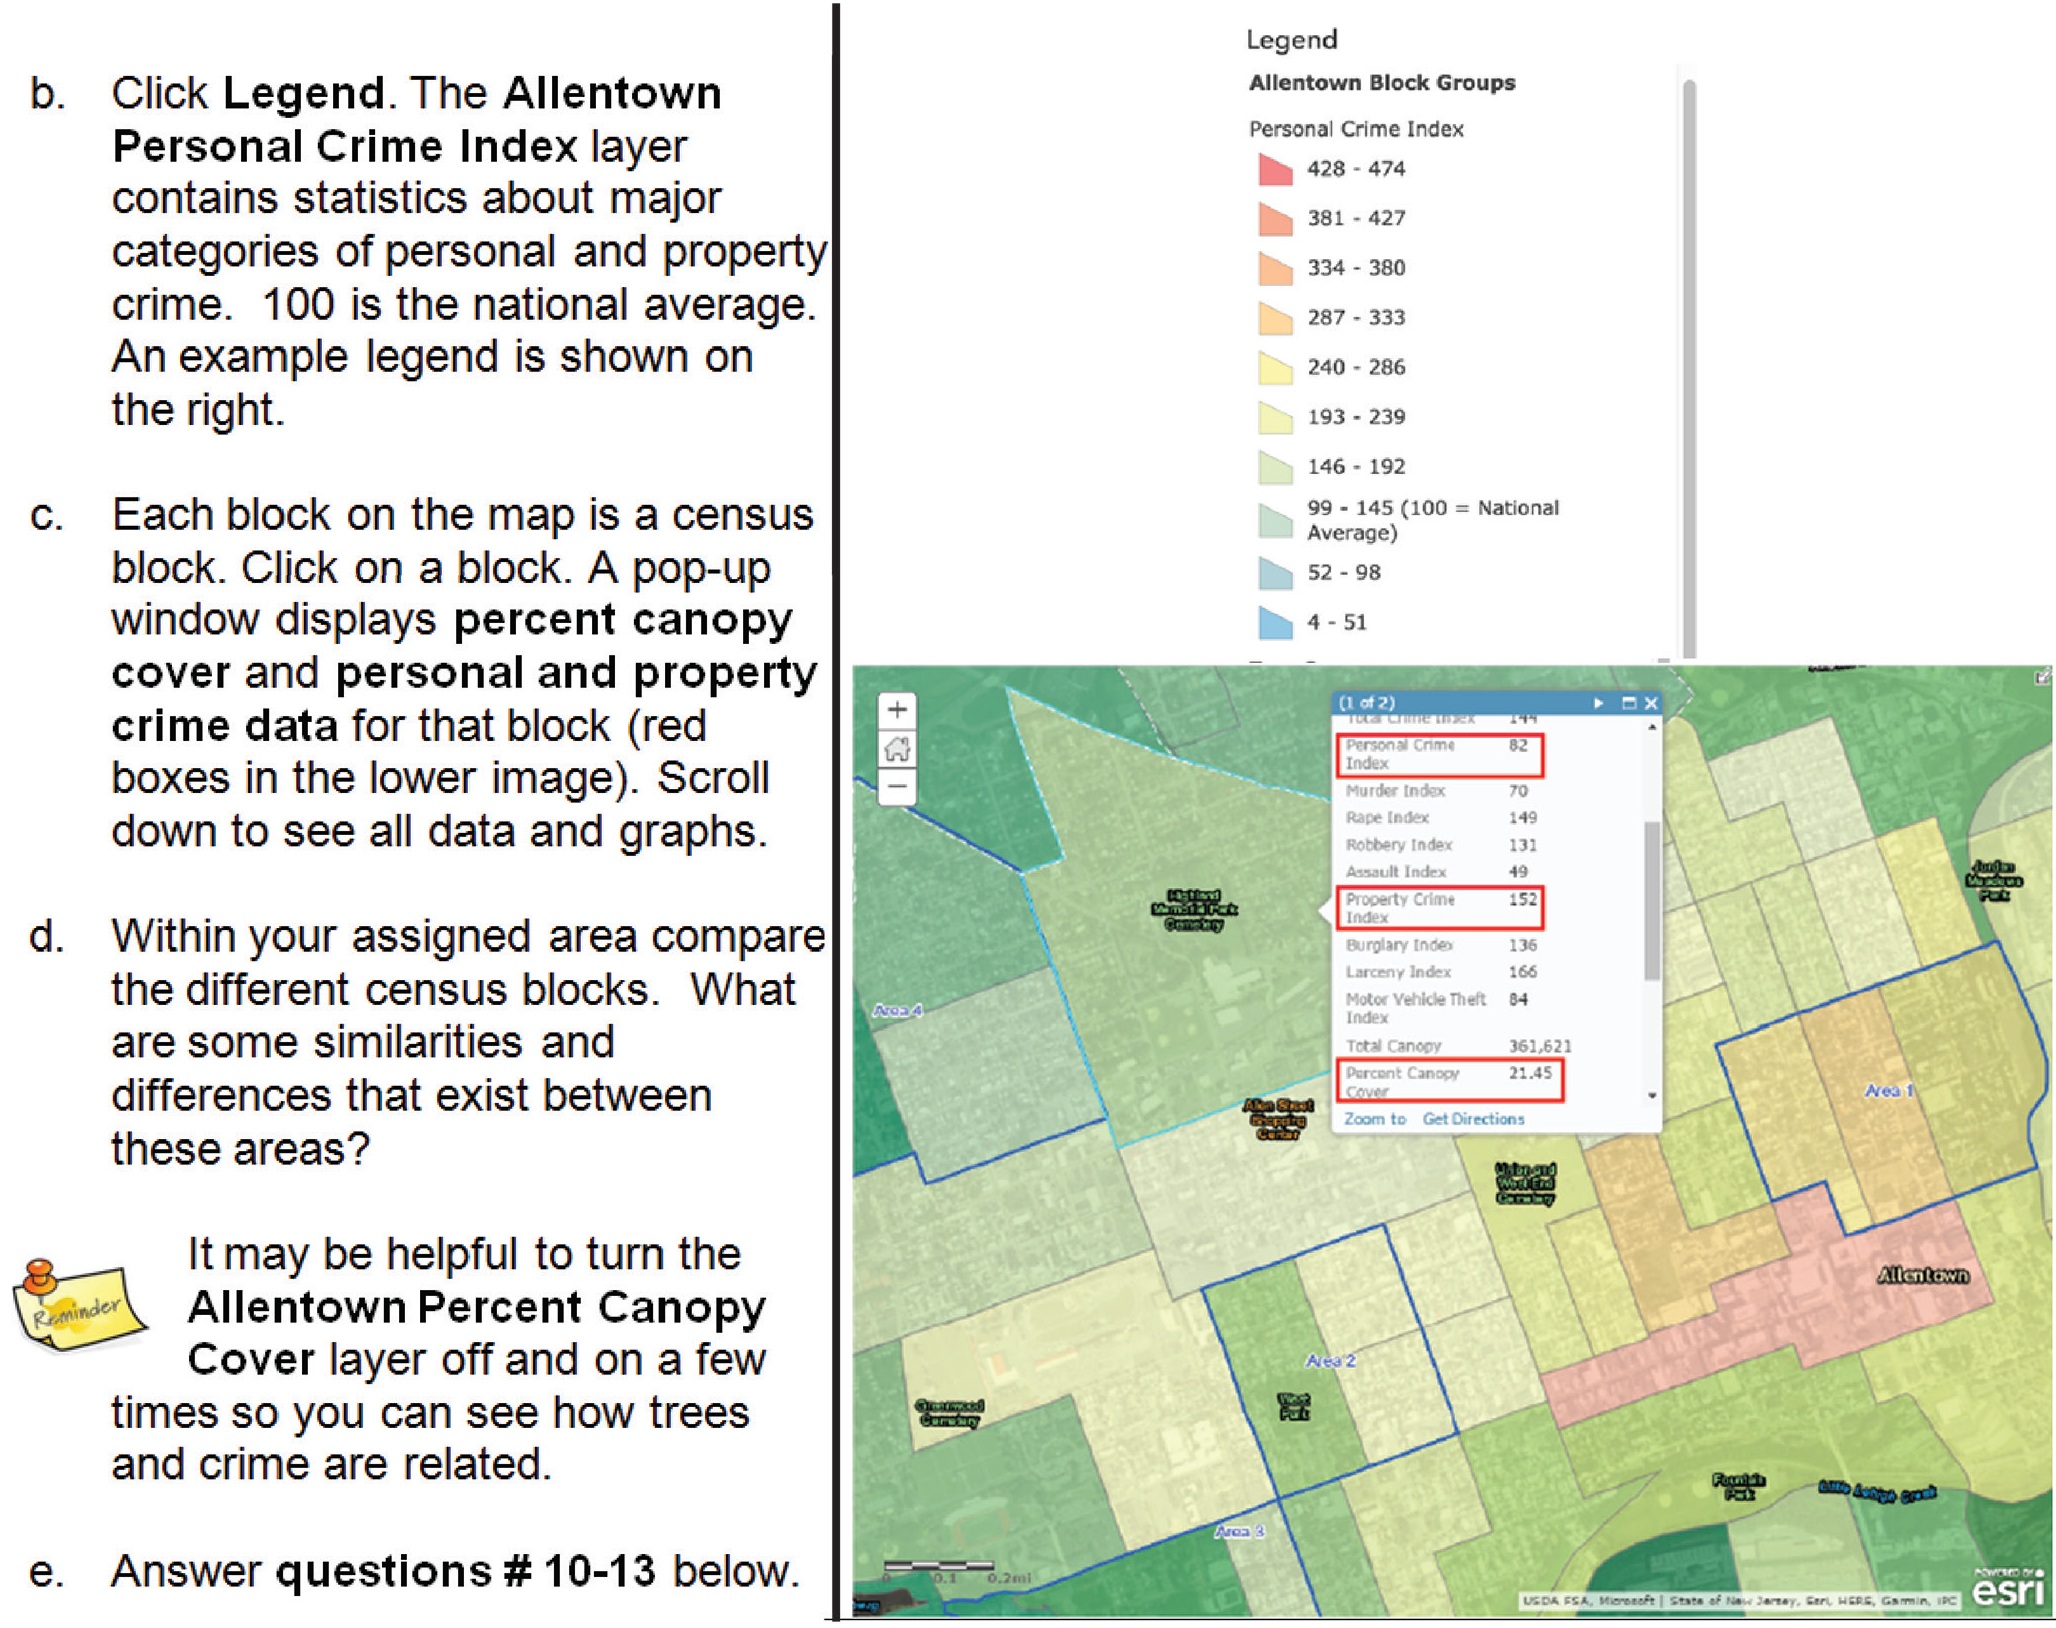 Excerpt from student materials, demonstrating intentional use of text, boldface fonts to draw attention to key terms, and visual cues to direct student use of the ArcGIS online.